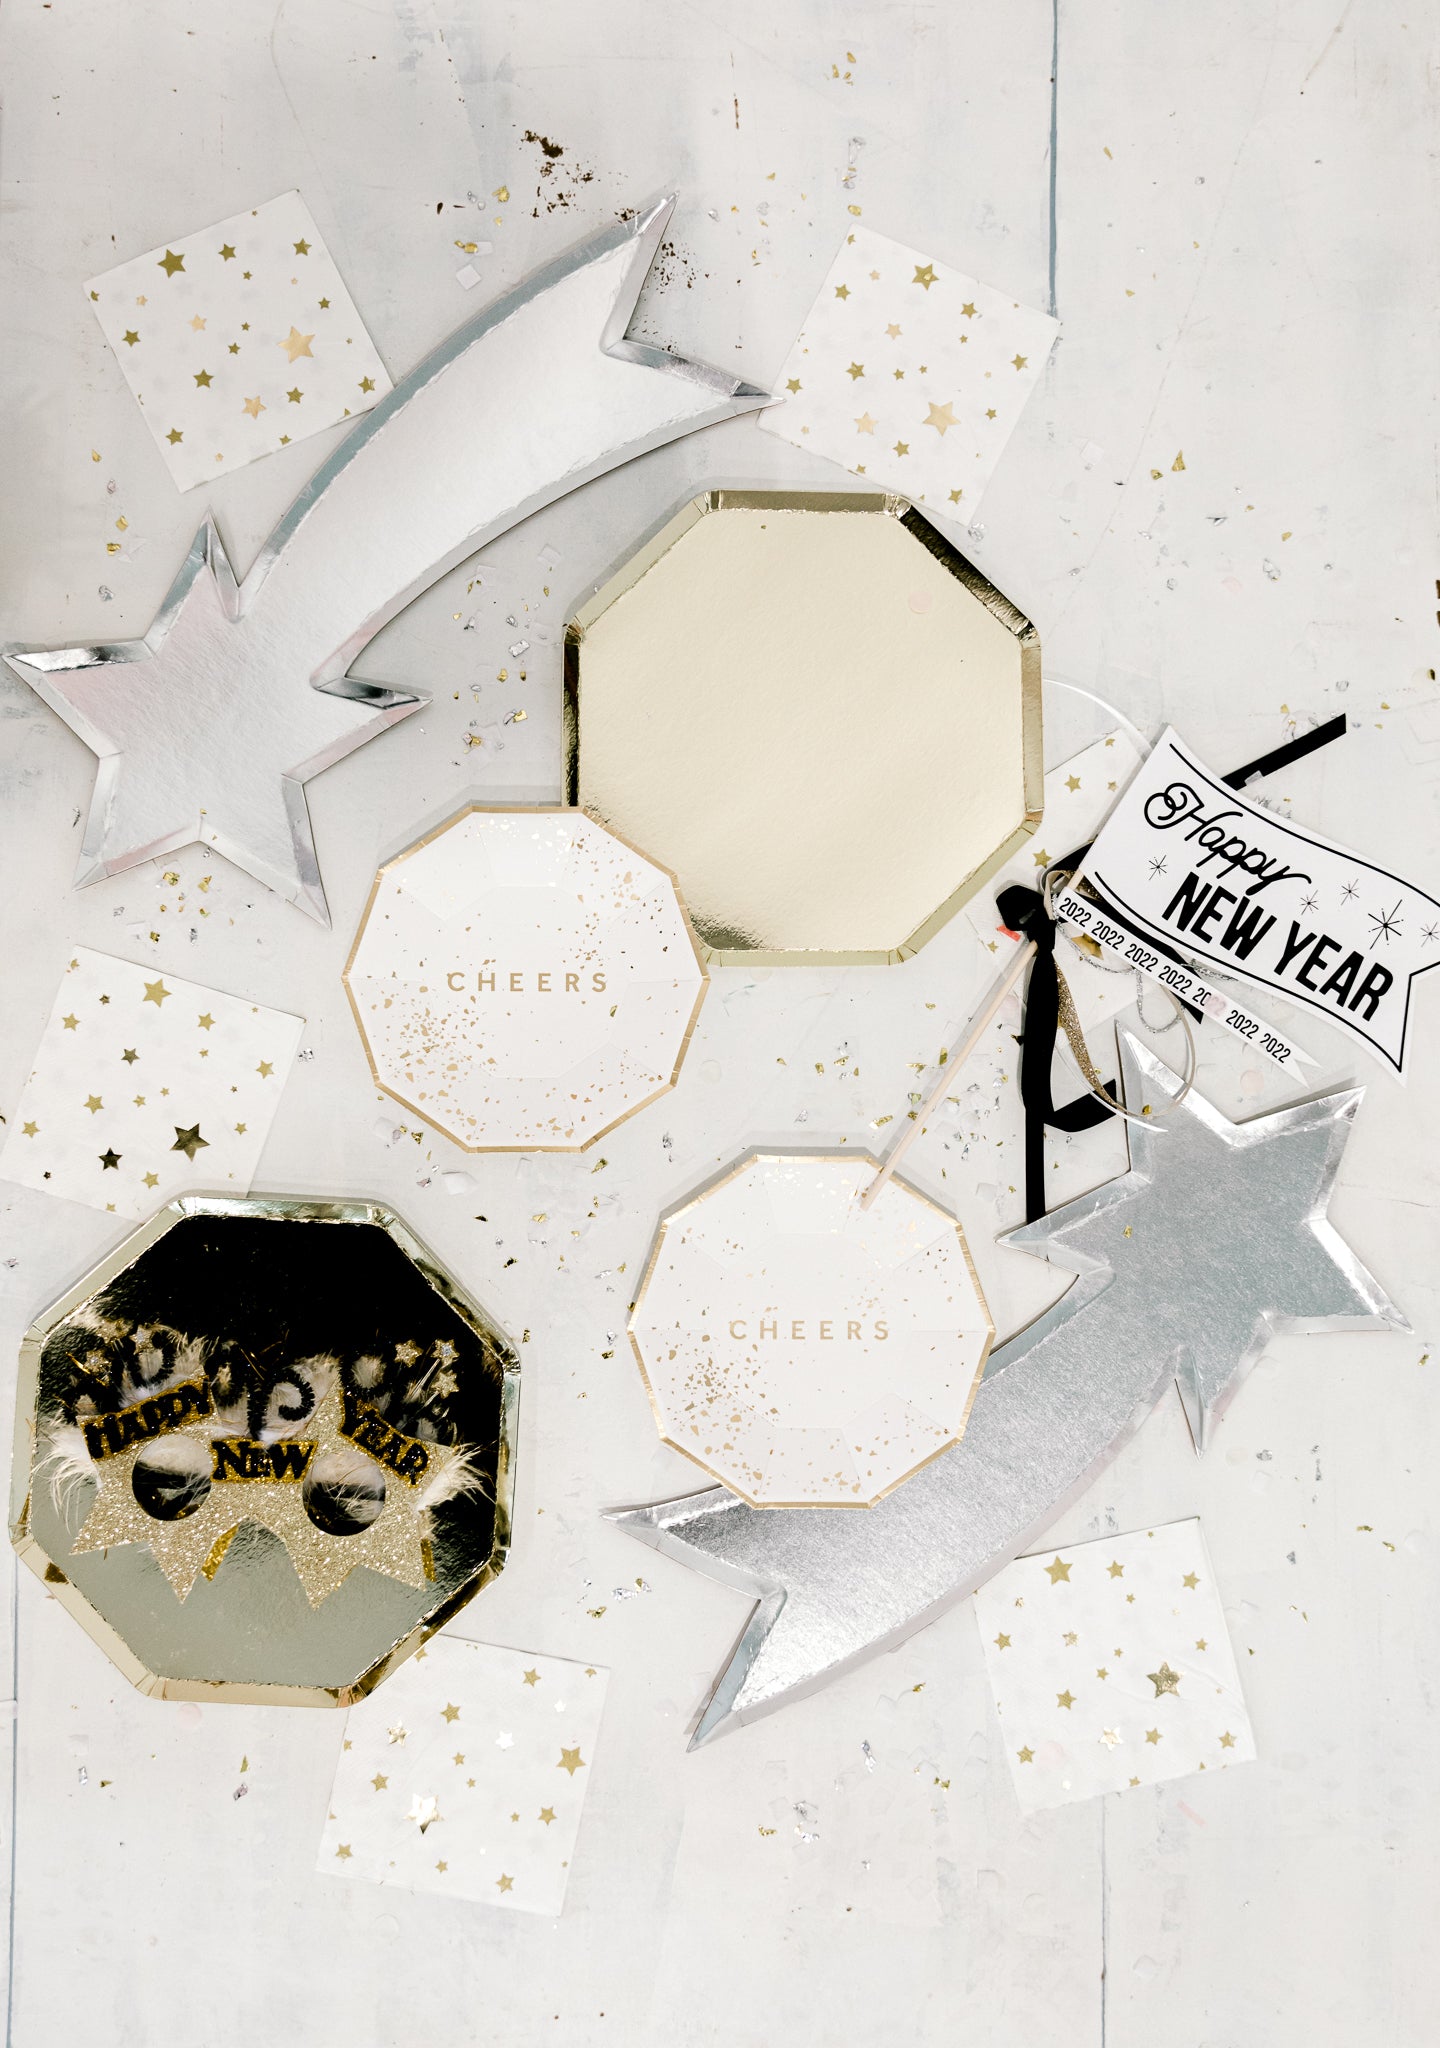 Silver and gold start themed disco plates and tableware.